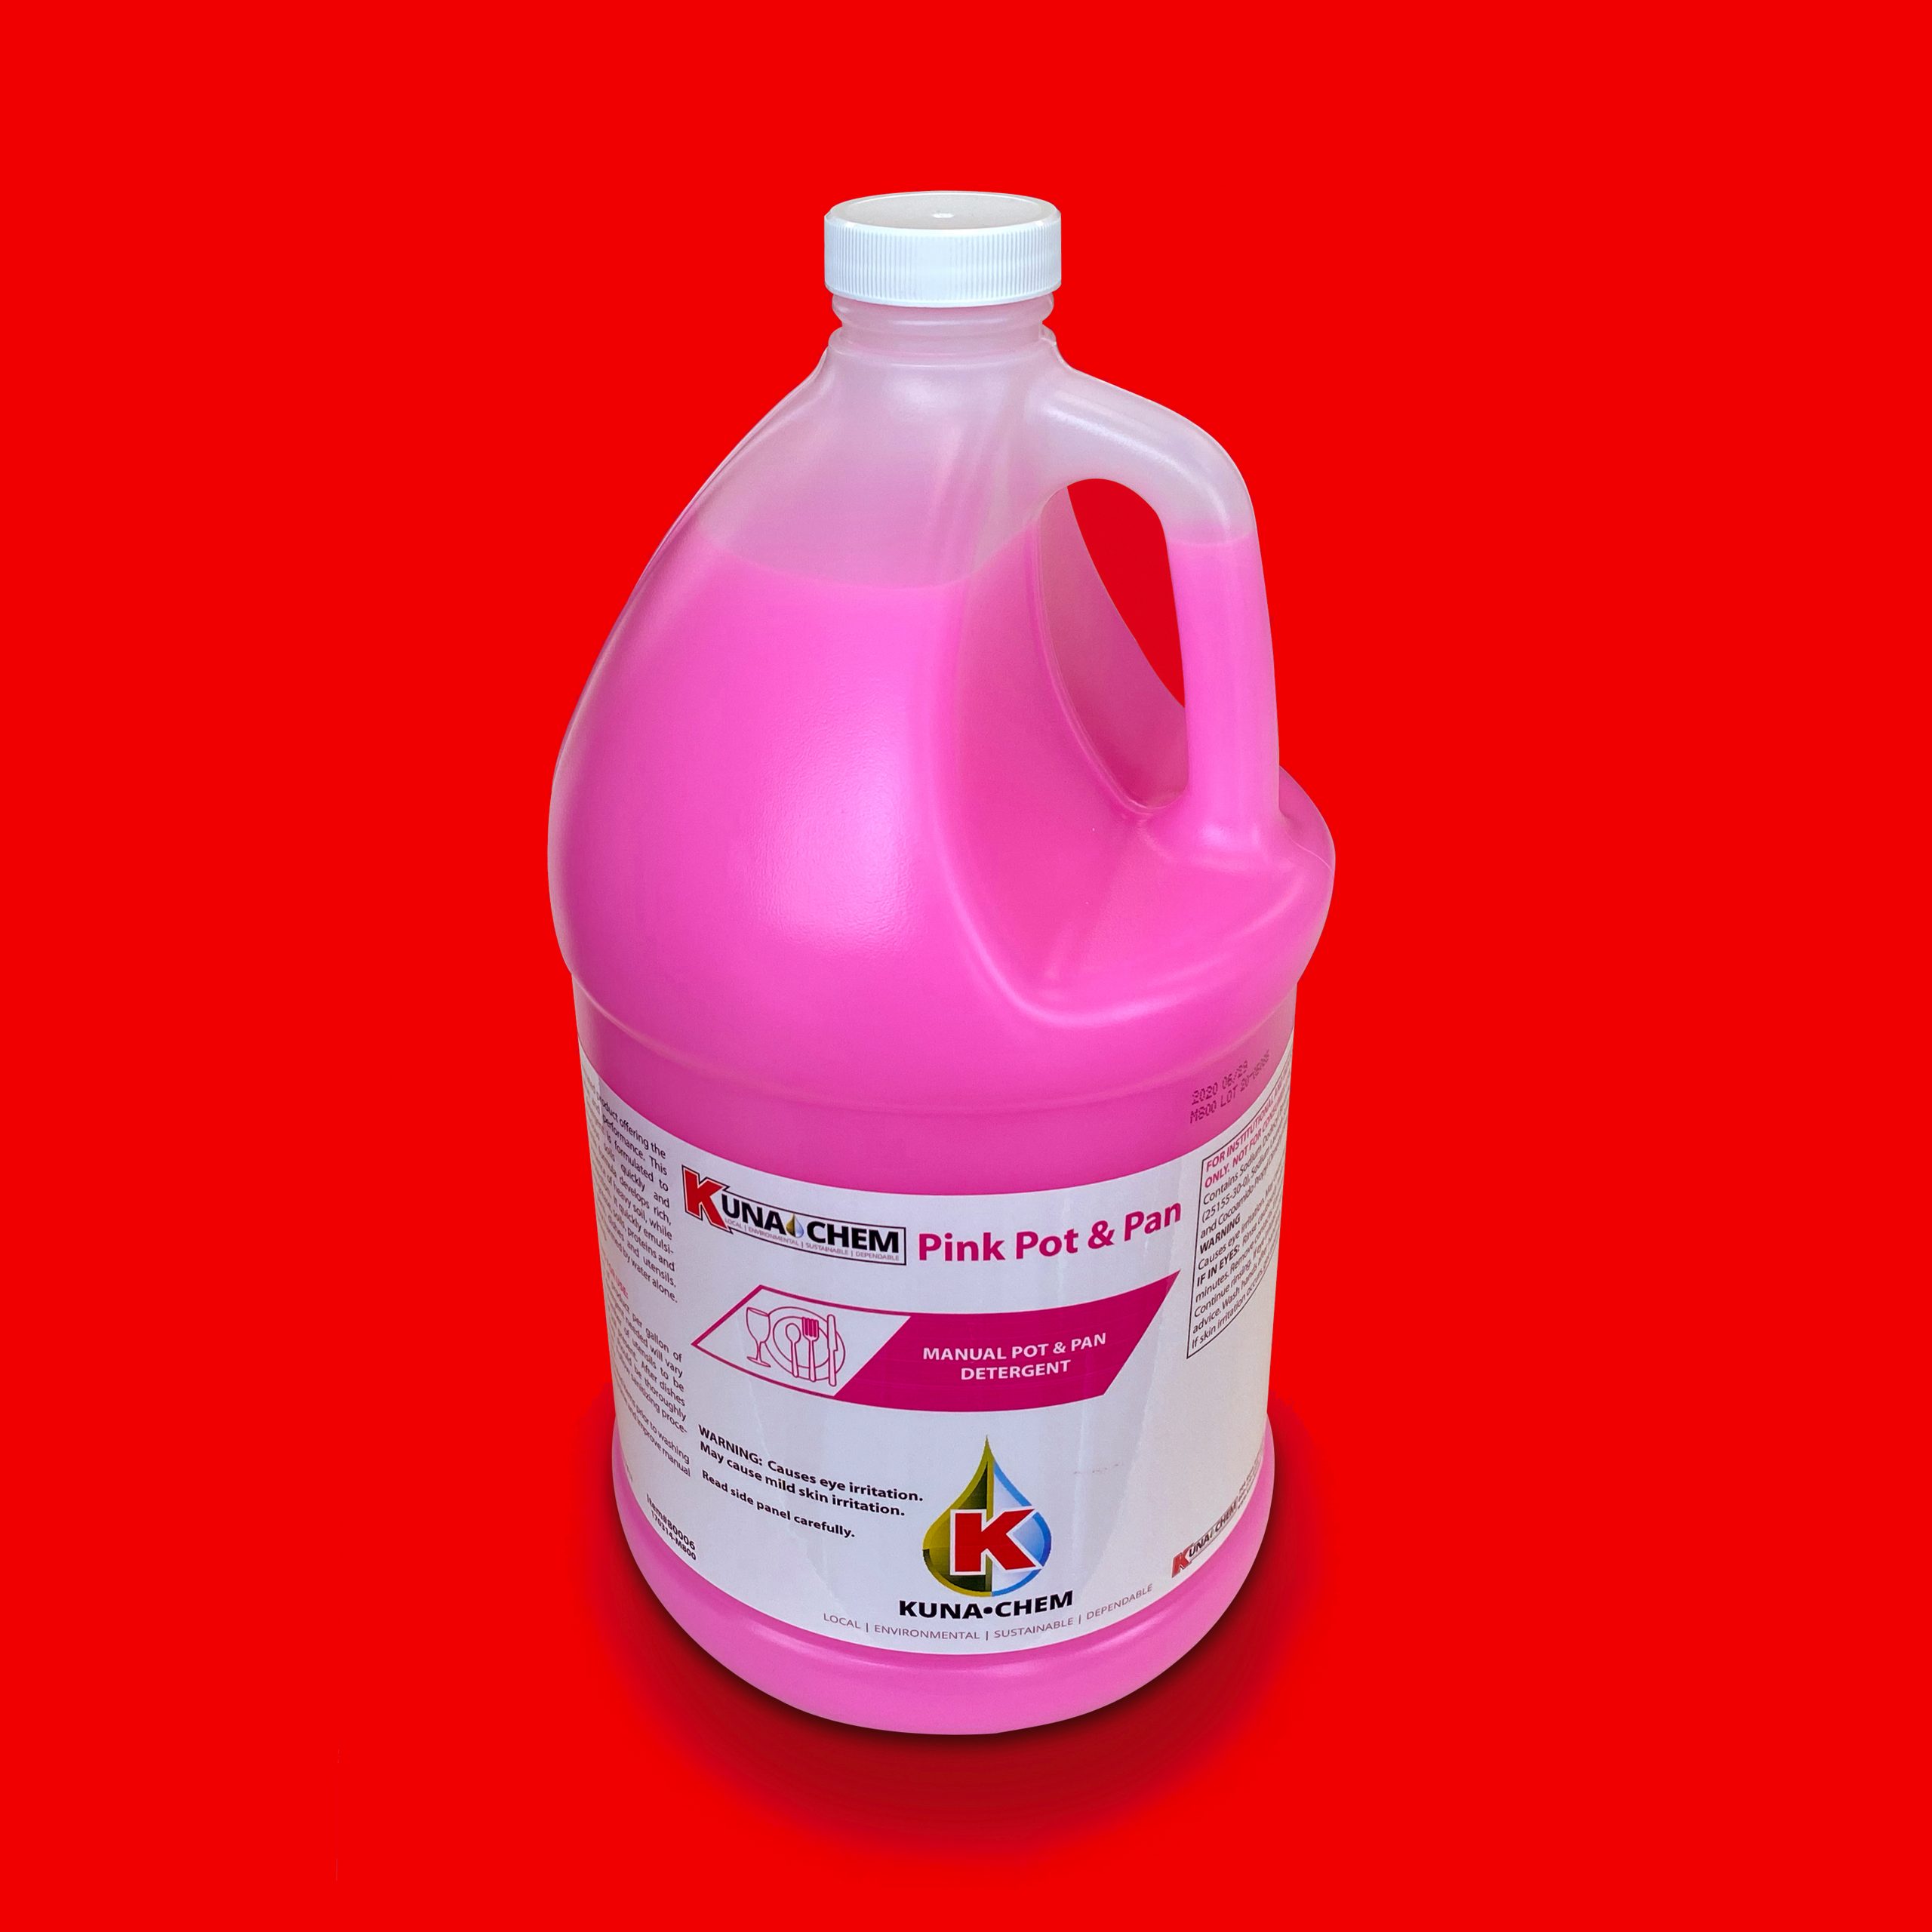 Kuna Chemical Pink Pot and Pan bottle over red background